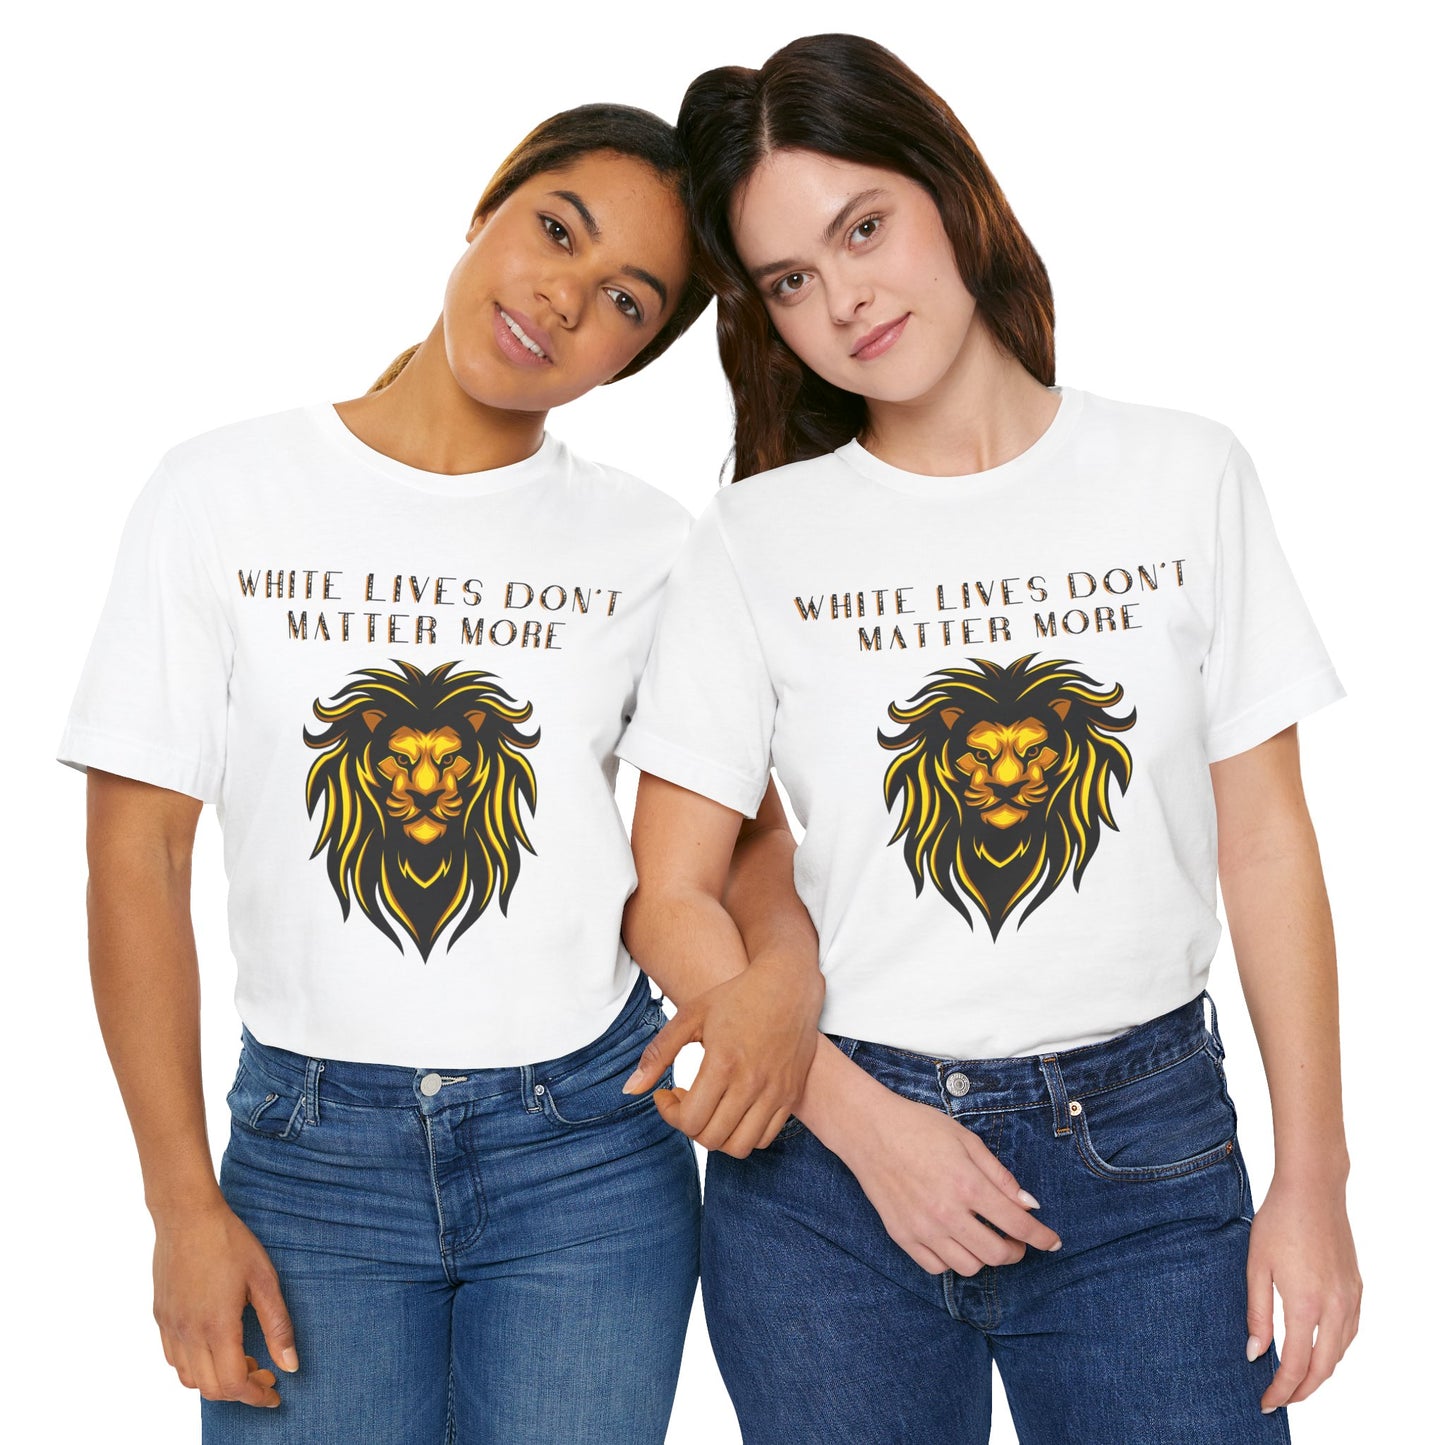 "White Lives Don't Matter More" White Short-Sleeve Jersey T-Shirt with Bold White Text and Lion Graphic